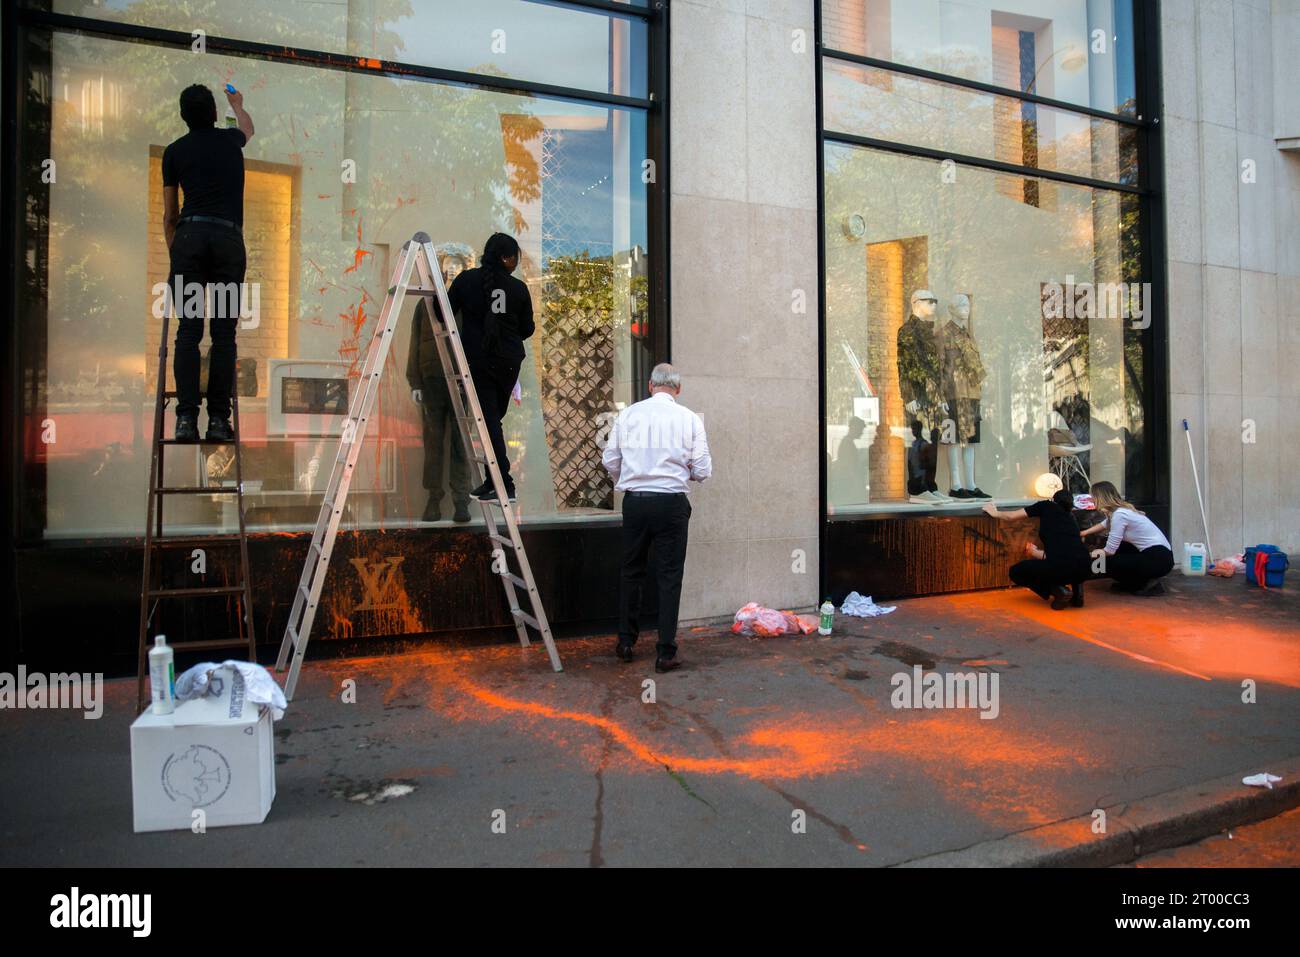 Louis Vuitton while remodeling their store window On The Champs